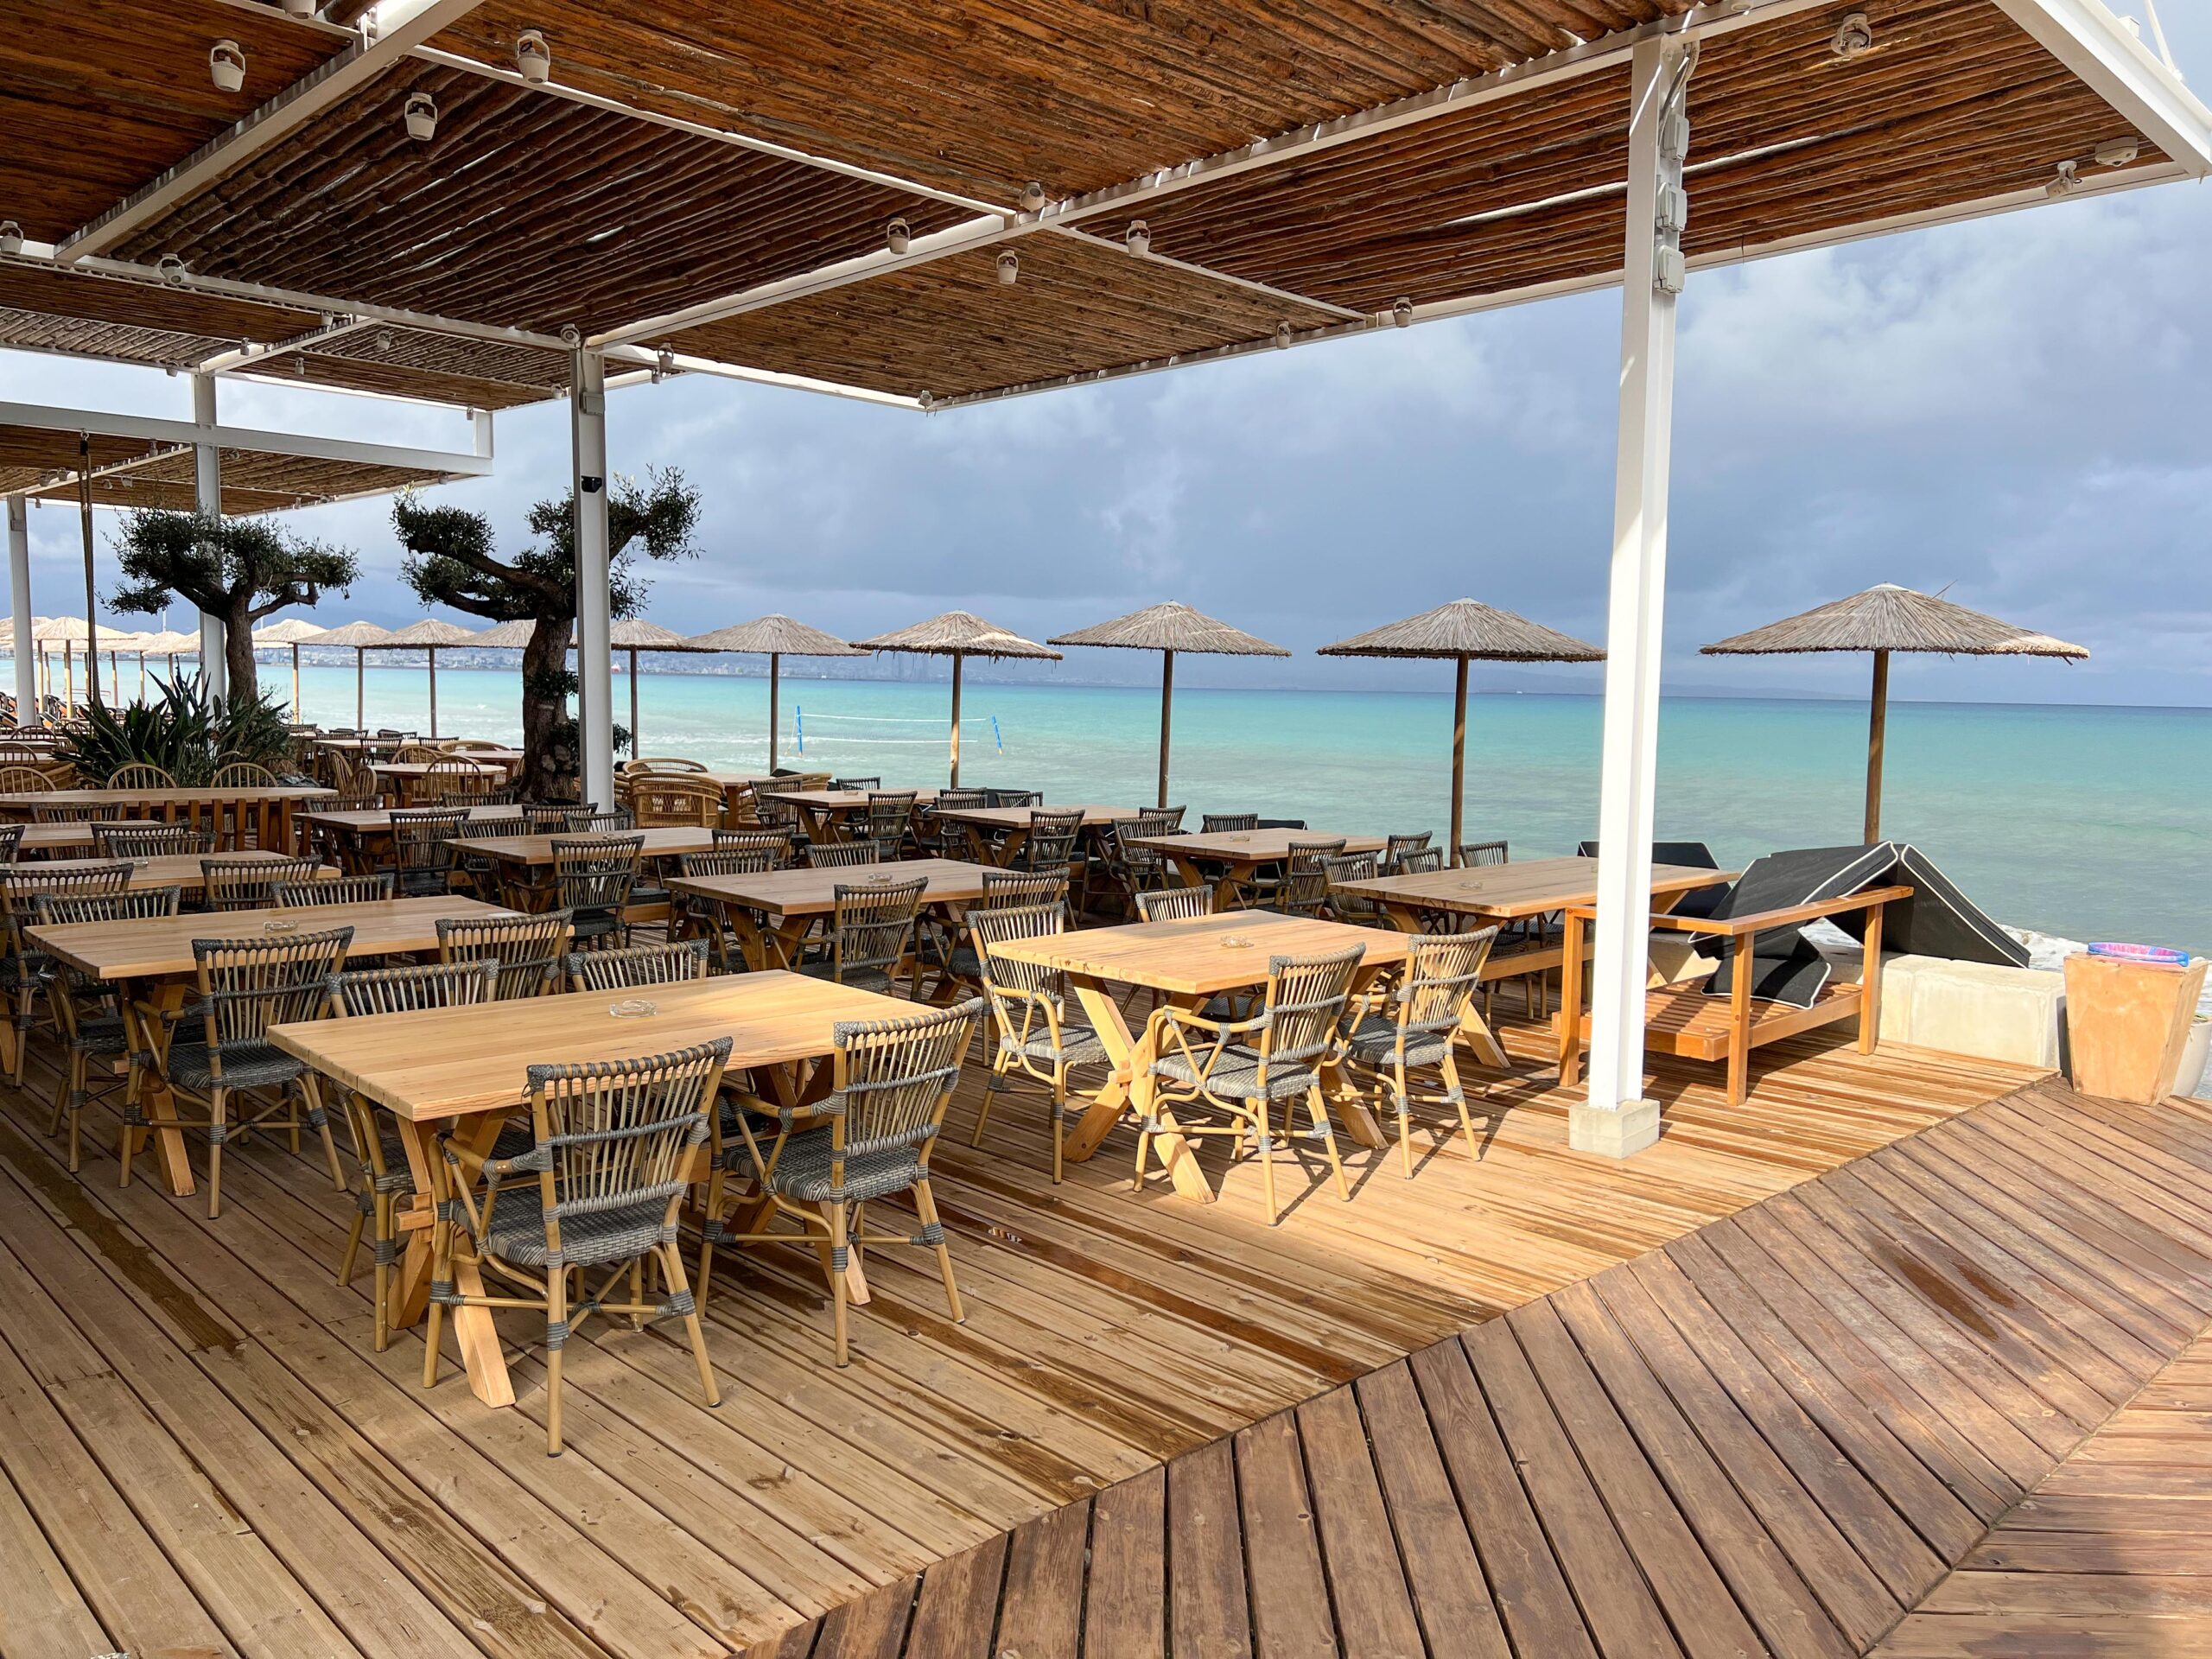 The best beach bar in Limassol, offering an enchanting view of the ocean from a serene wooden deck with tables and chairs.